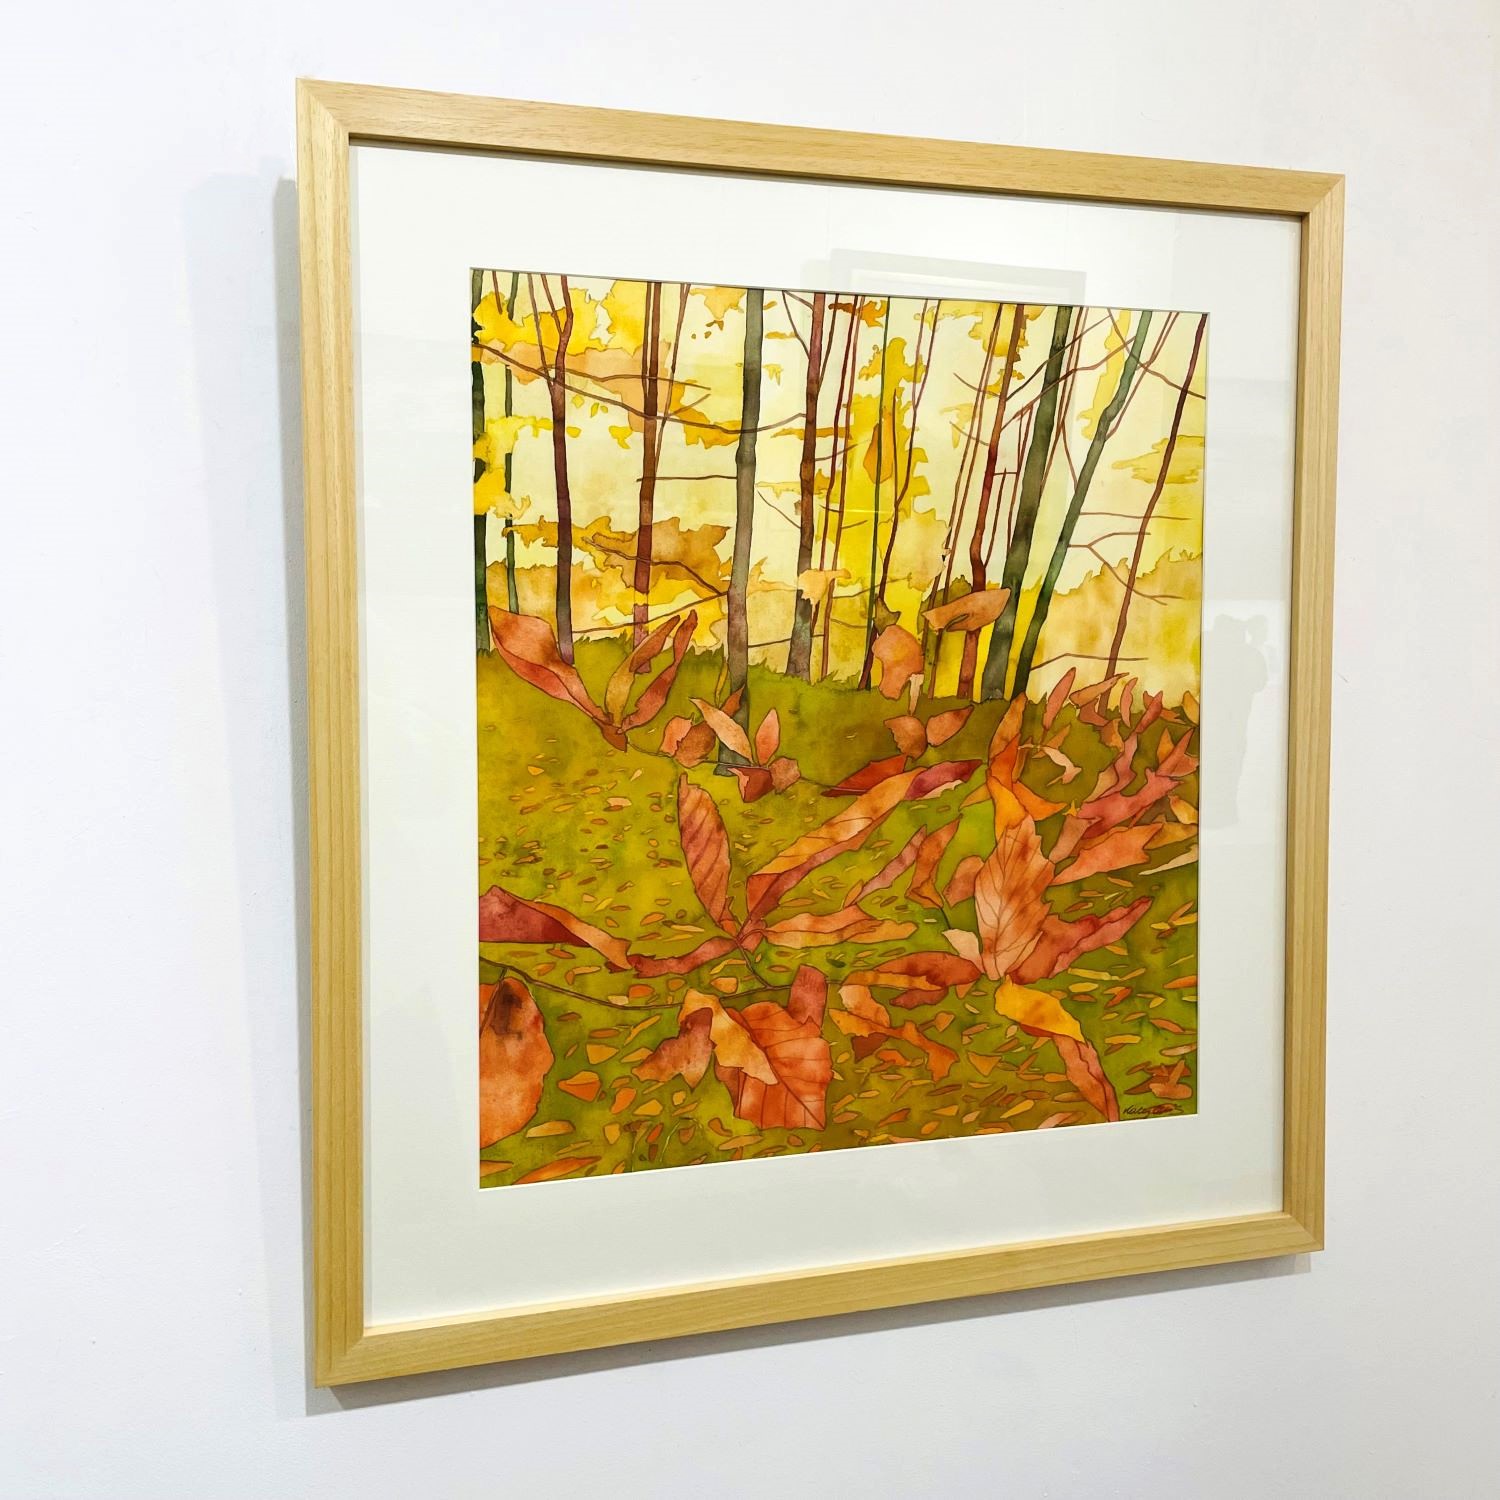 'Yellow Forest' by artist Katy Ellis